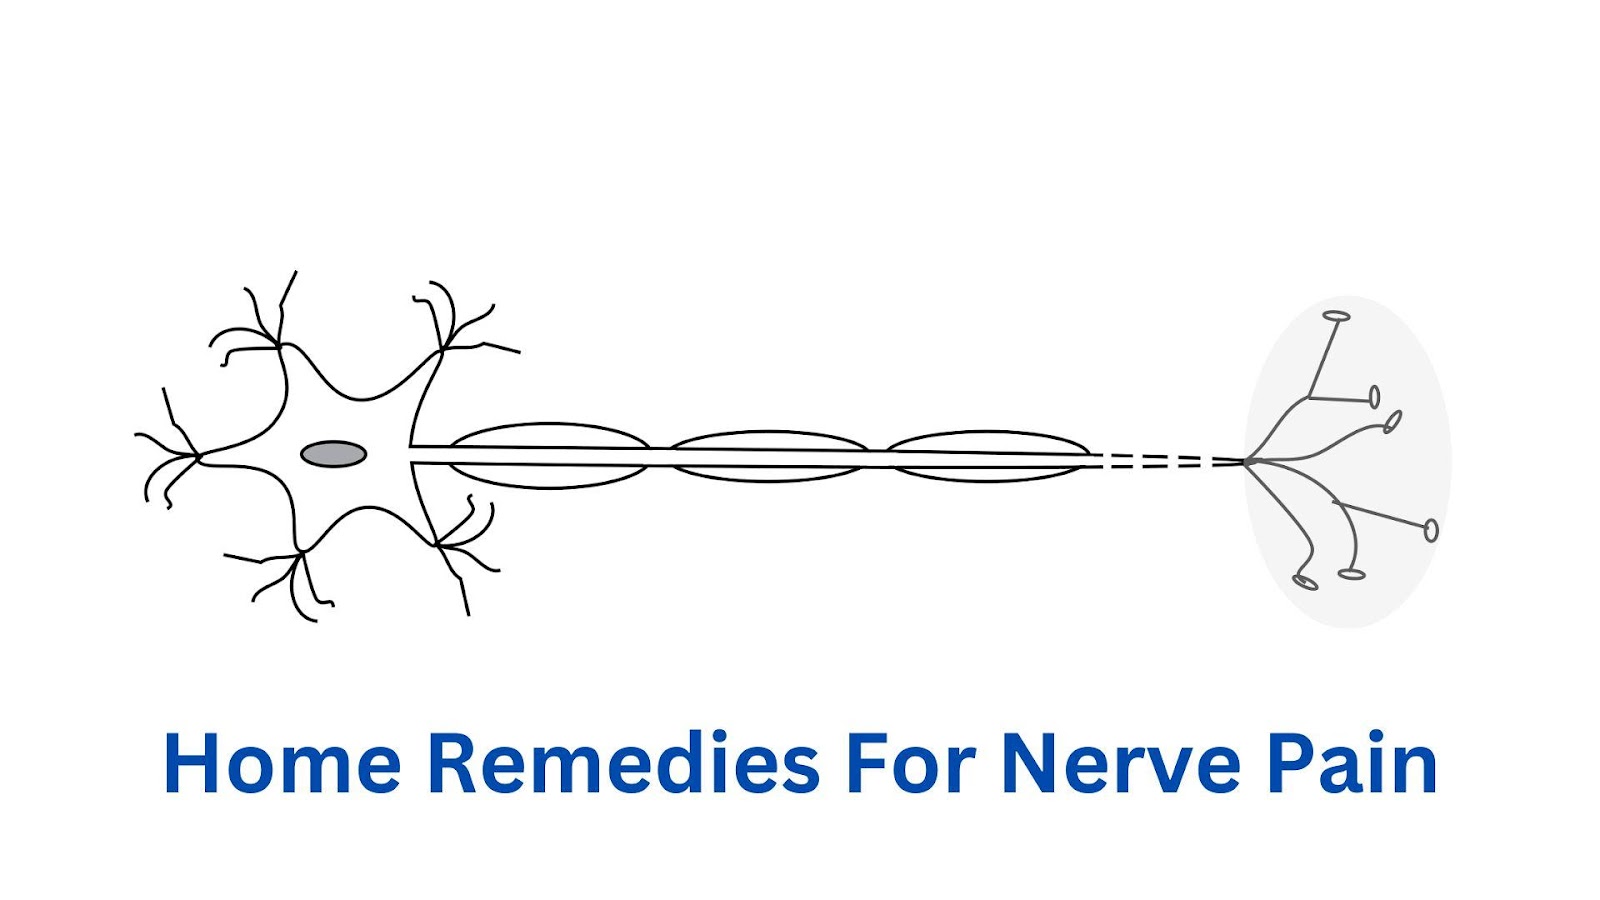 Home remedies for neuropathic pain